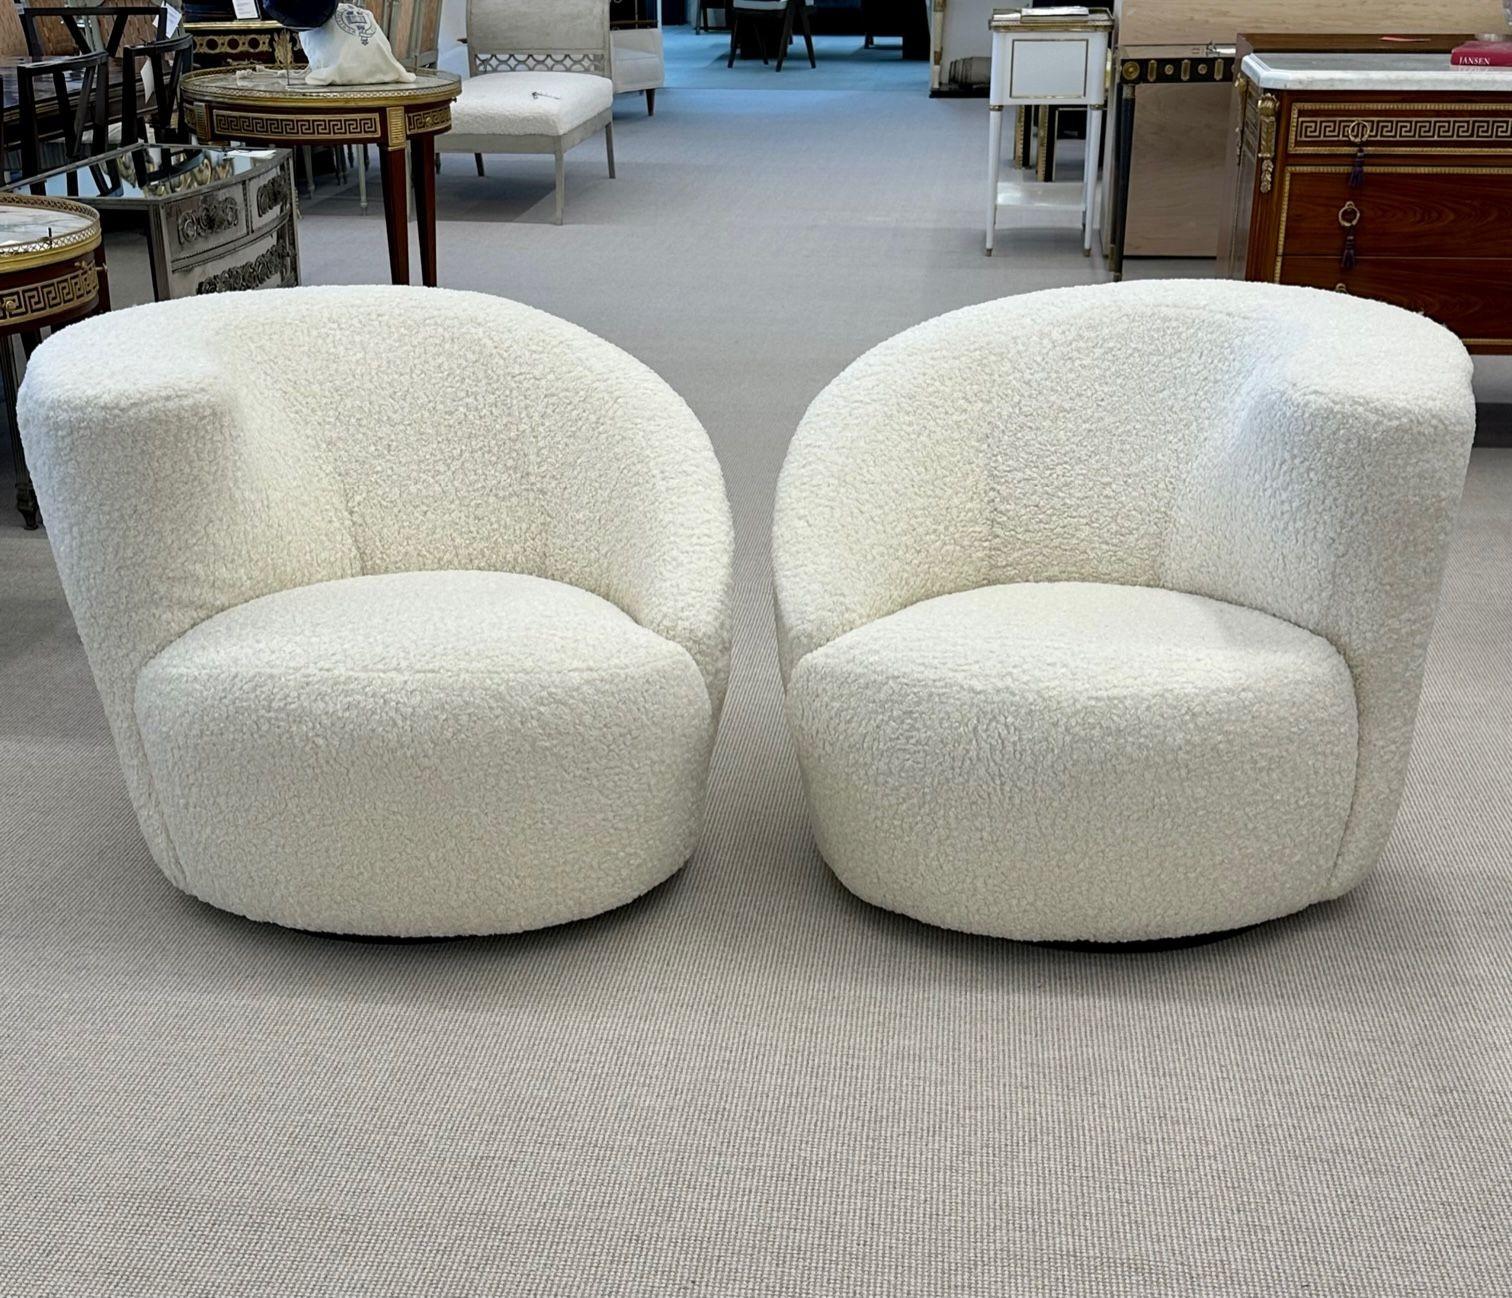 Pair Mid-Century Modern Nautilus Swivel Chairs, Vladimir Kagan for Directional
 
The pair having new boucle fabric on large swivel bases. Bearing the original Directional tag. 
 
Other American designers of the period include Milo Baughman, Paul